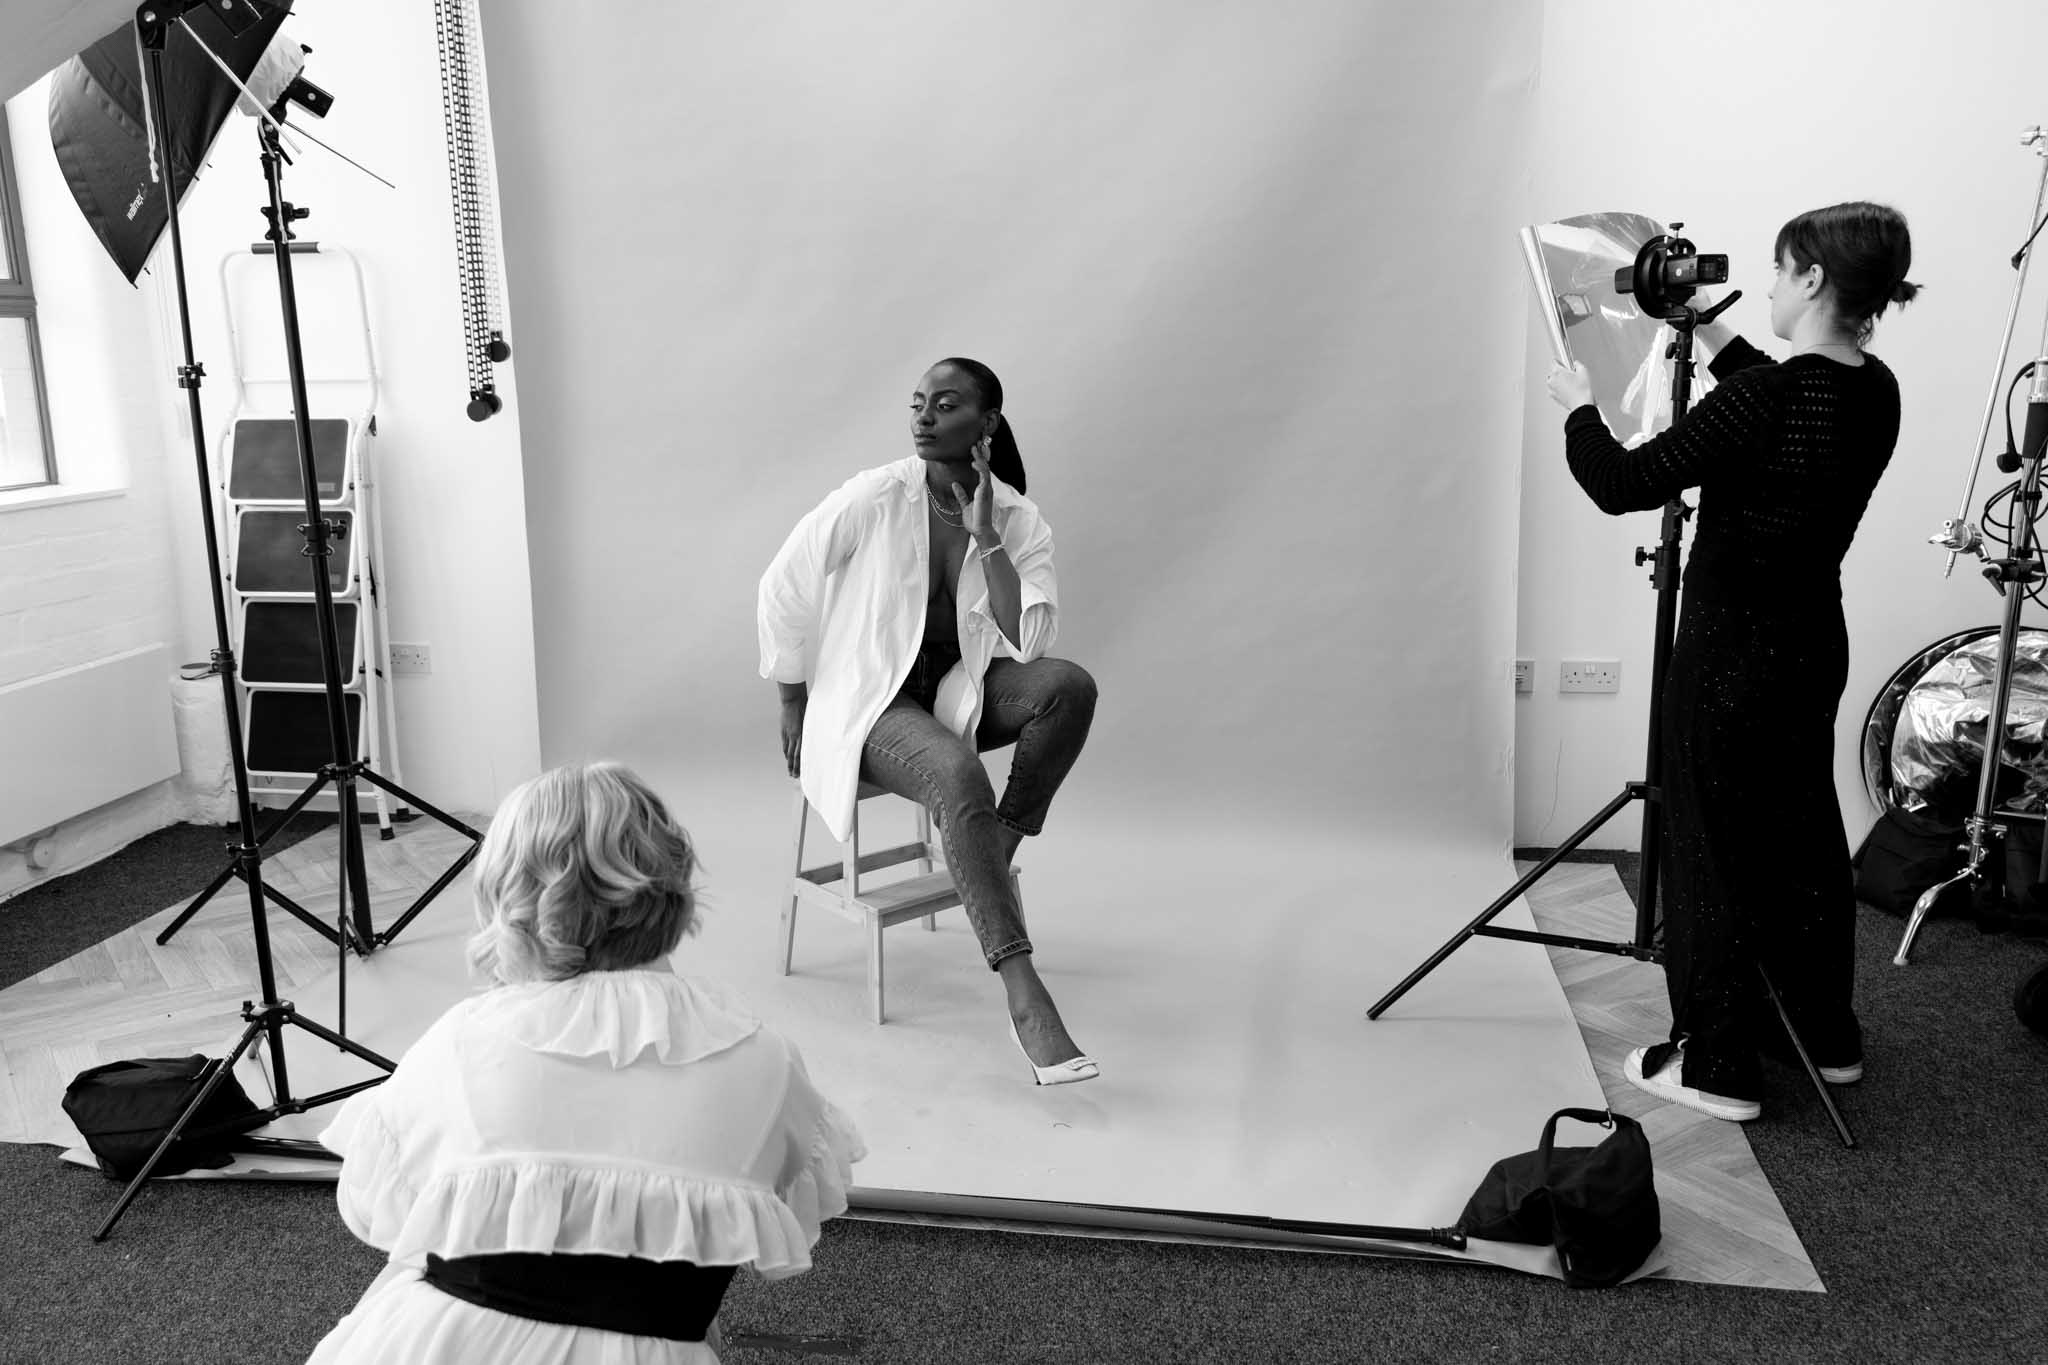 behind the scenes of a fashion jewellery photoshoot at a Birmingham photo studio